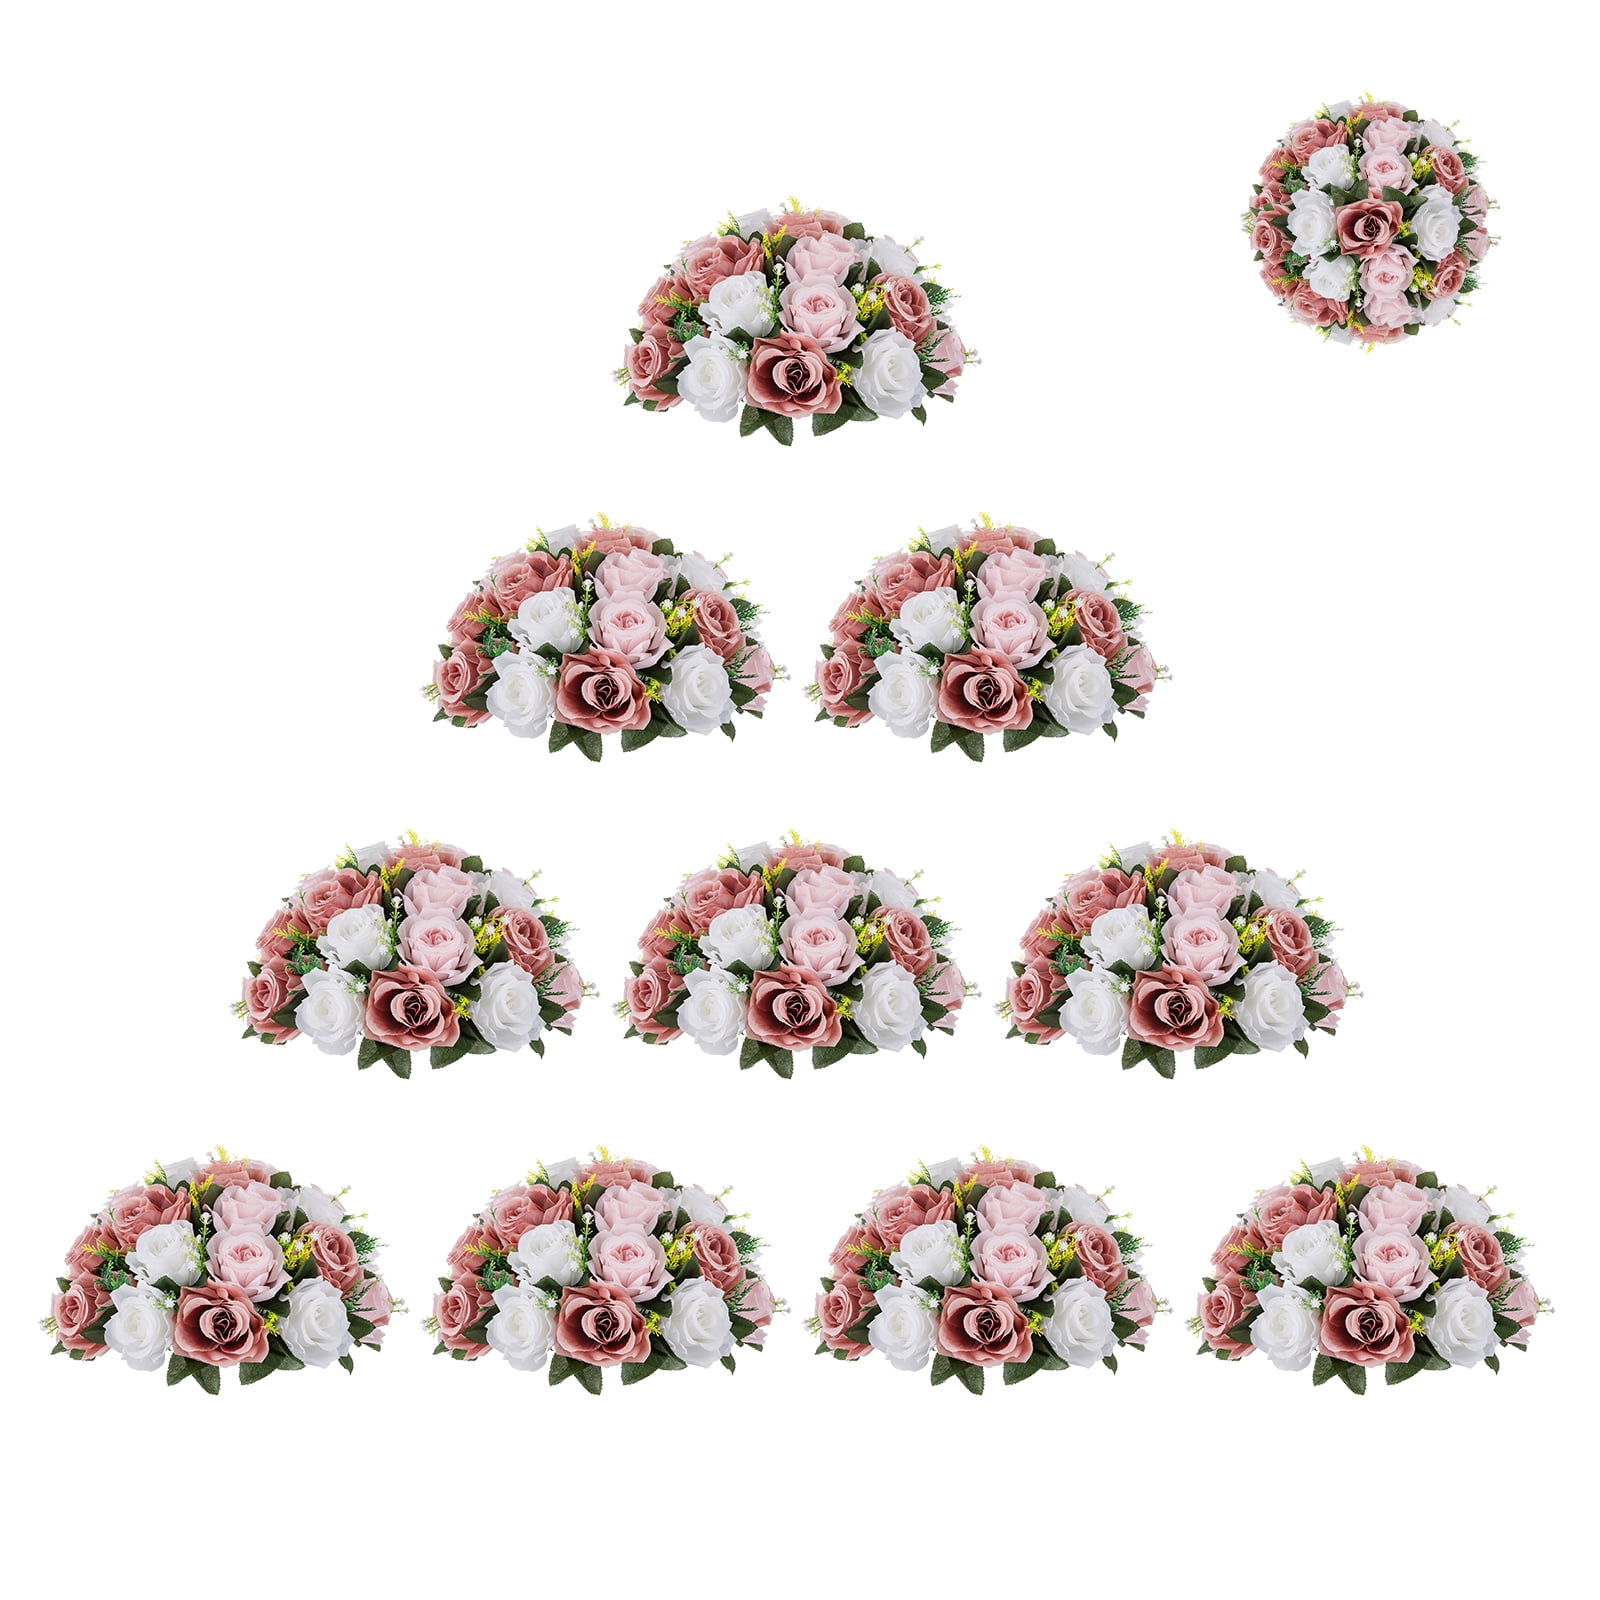  Amosfun 48 Pcs Plush Rose Wedding Flower Decor Flower Toy  Centerpiece Table Decorations Fake Couch Filler Stuffing Stuffed Rose  Toddler Dried Flowers Dining Table Filled with Down Cotton : Home 